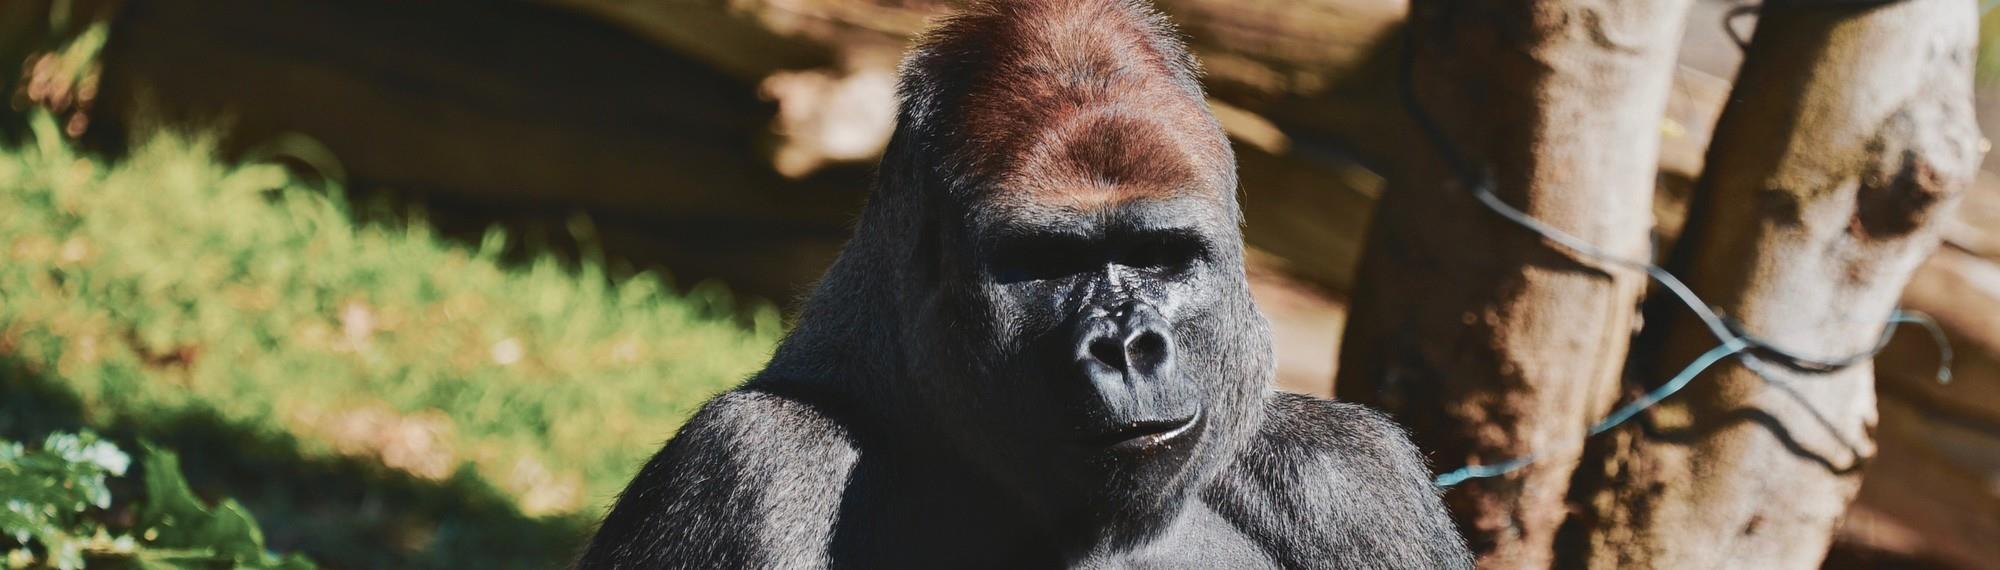 Close-up of a Gorilla, sitting in the Sun and looking directly to the camera.